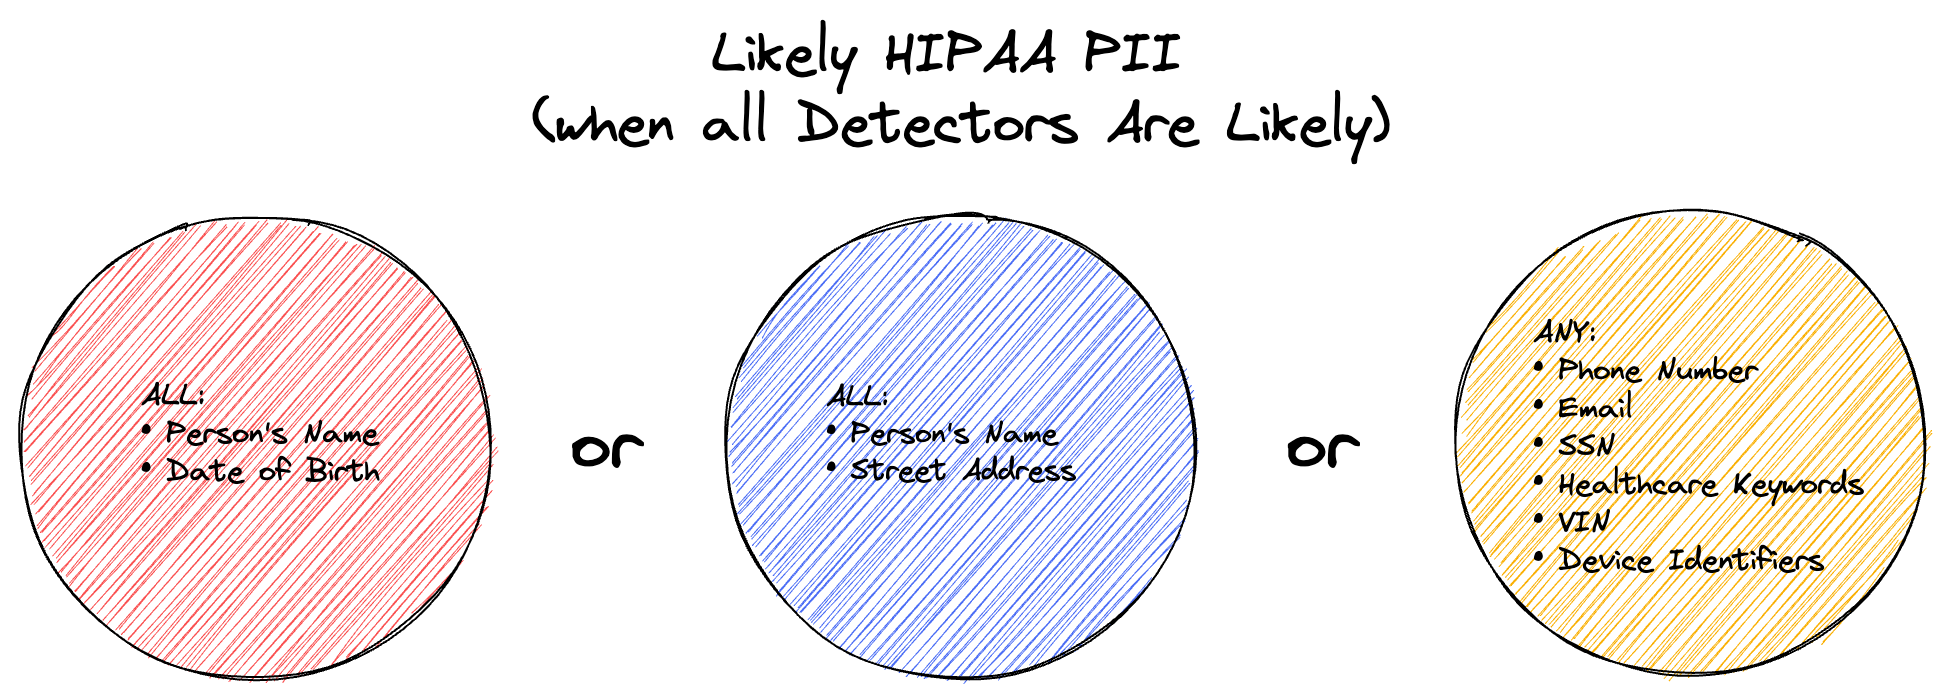 Combination of PII that are considered HIPAA PII